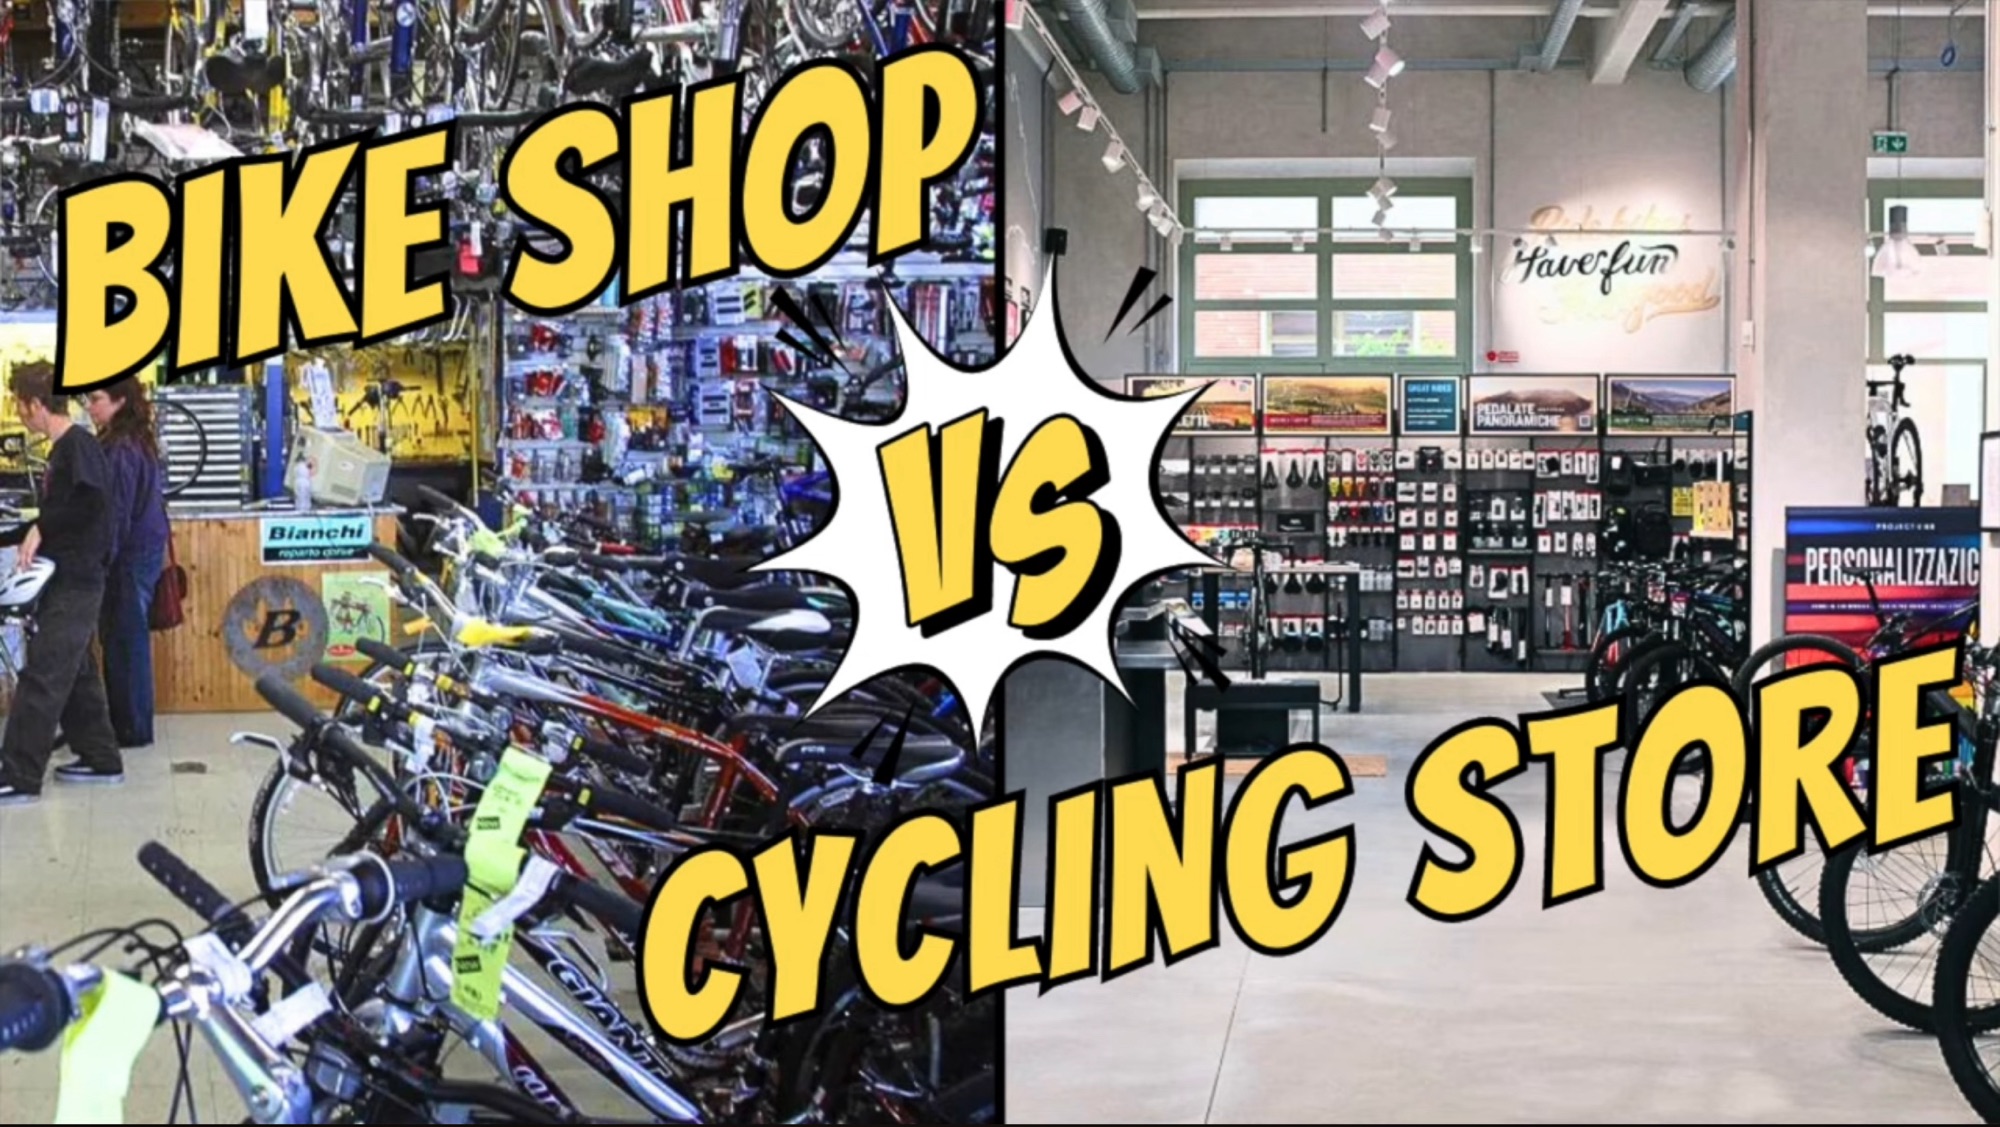 How To Save The Bicycle Industry?